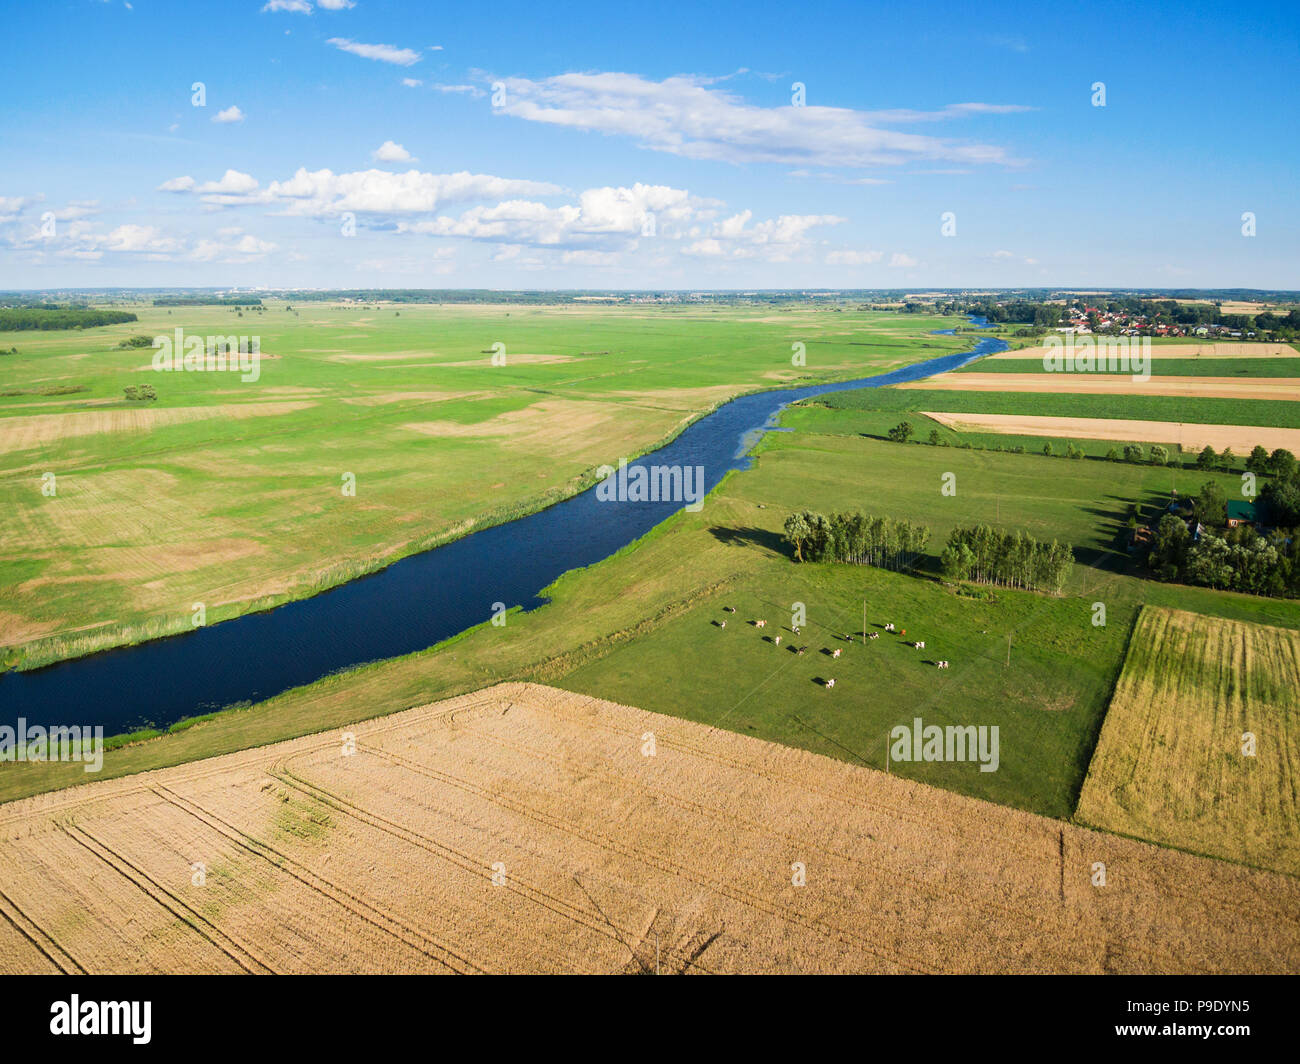 Cows grazing on green pasture by a river, under blue cloudy sky Stock Photo